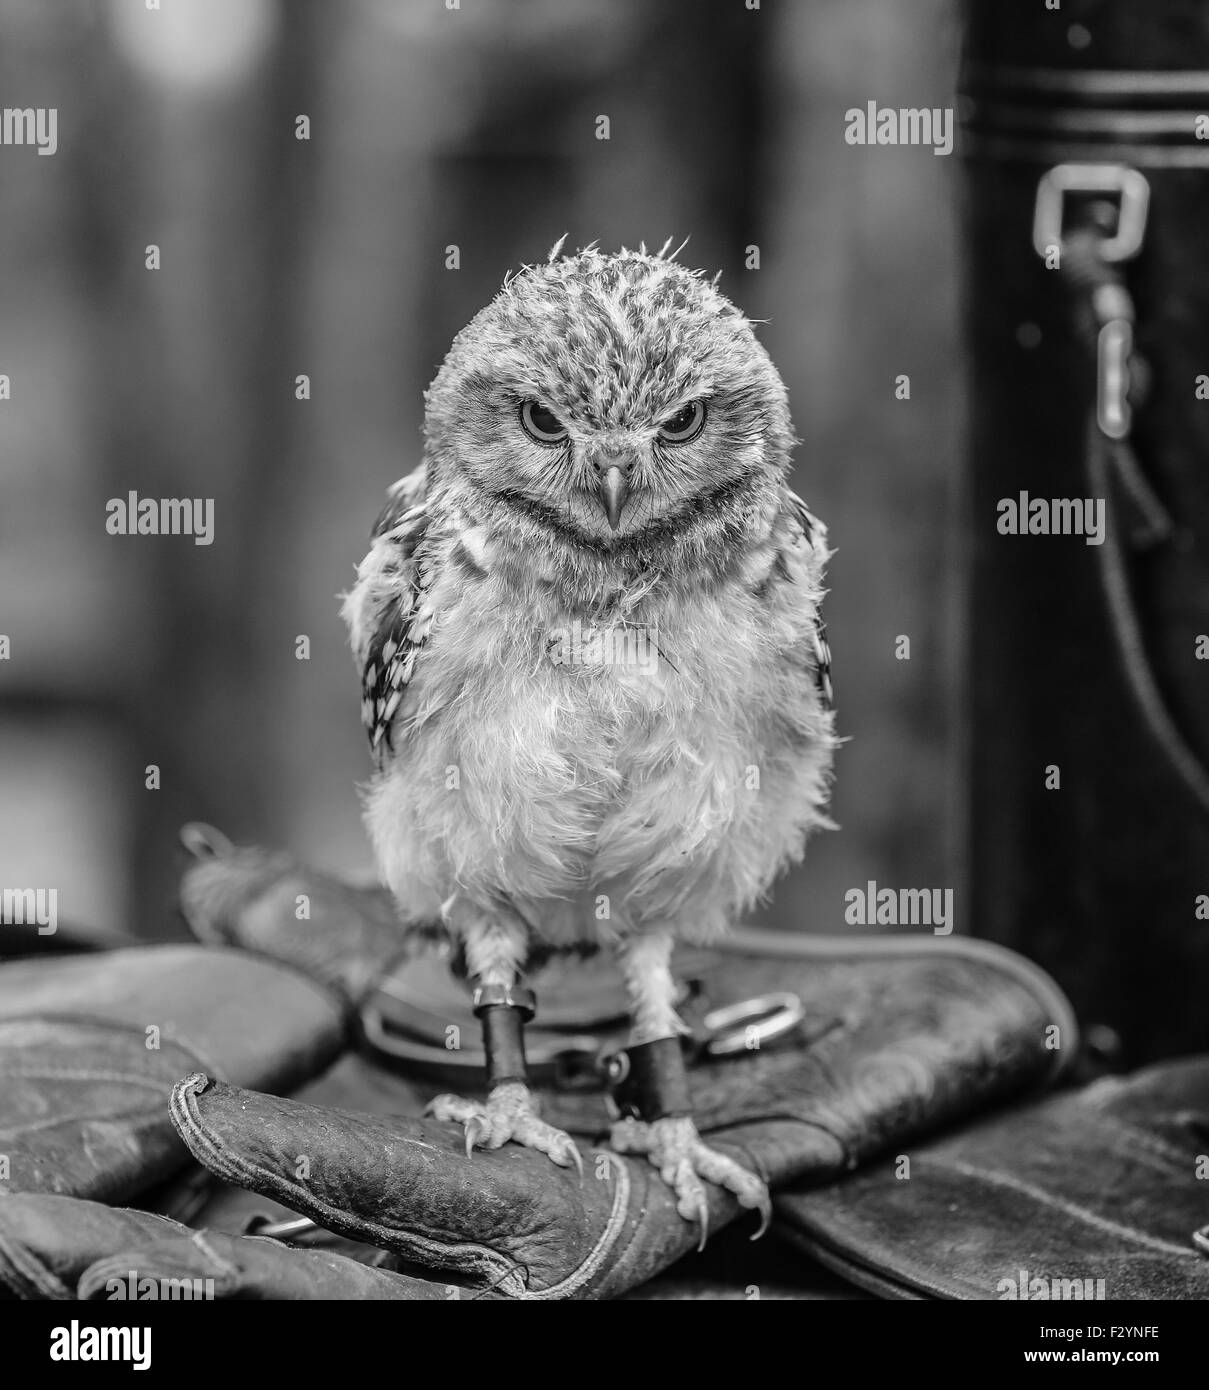 Baby burrowing owl perched on handlers glove, looking straight at the camera and edited into black and white. Stock Photo